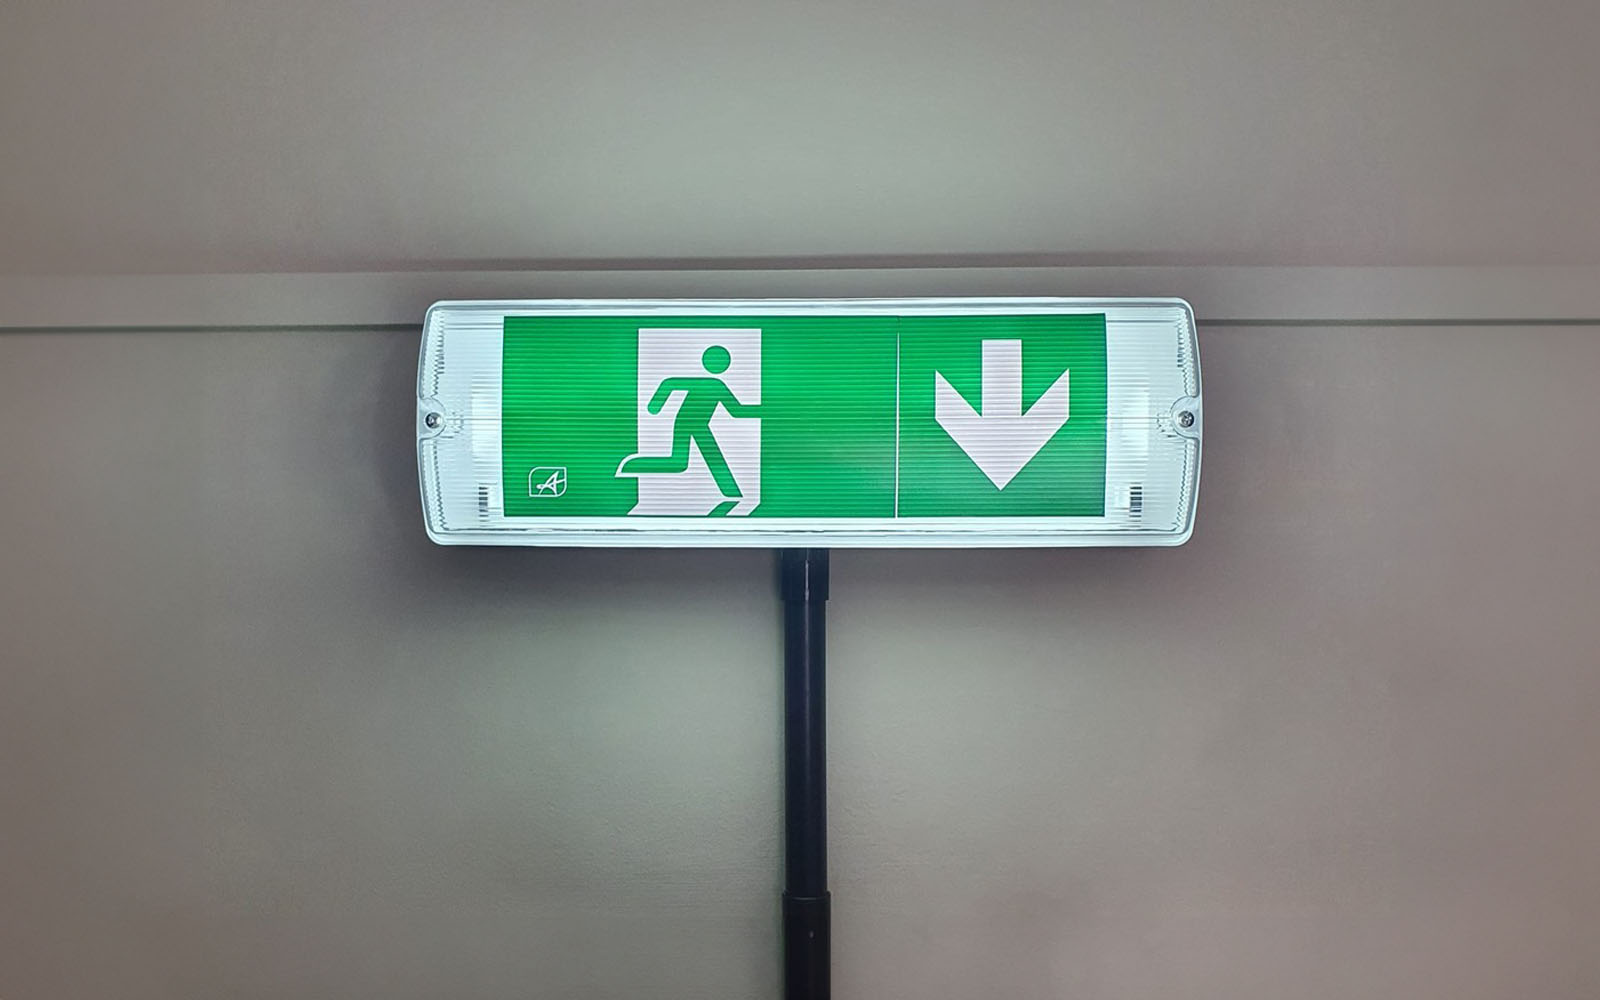 Fire exit light display